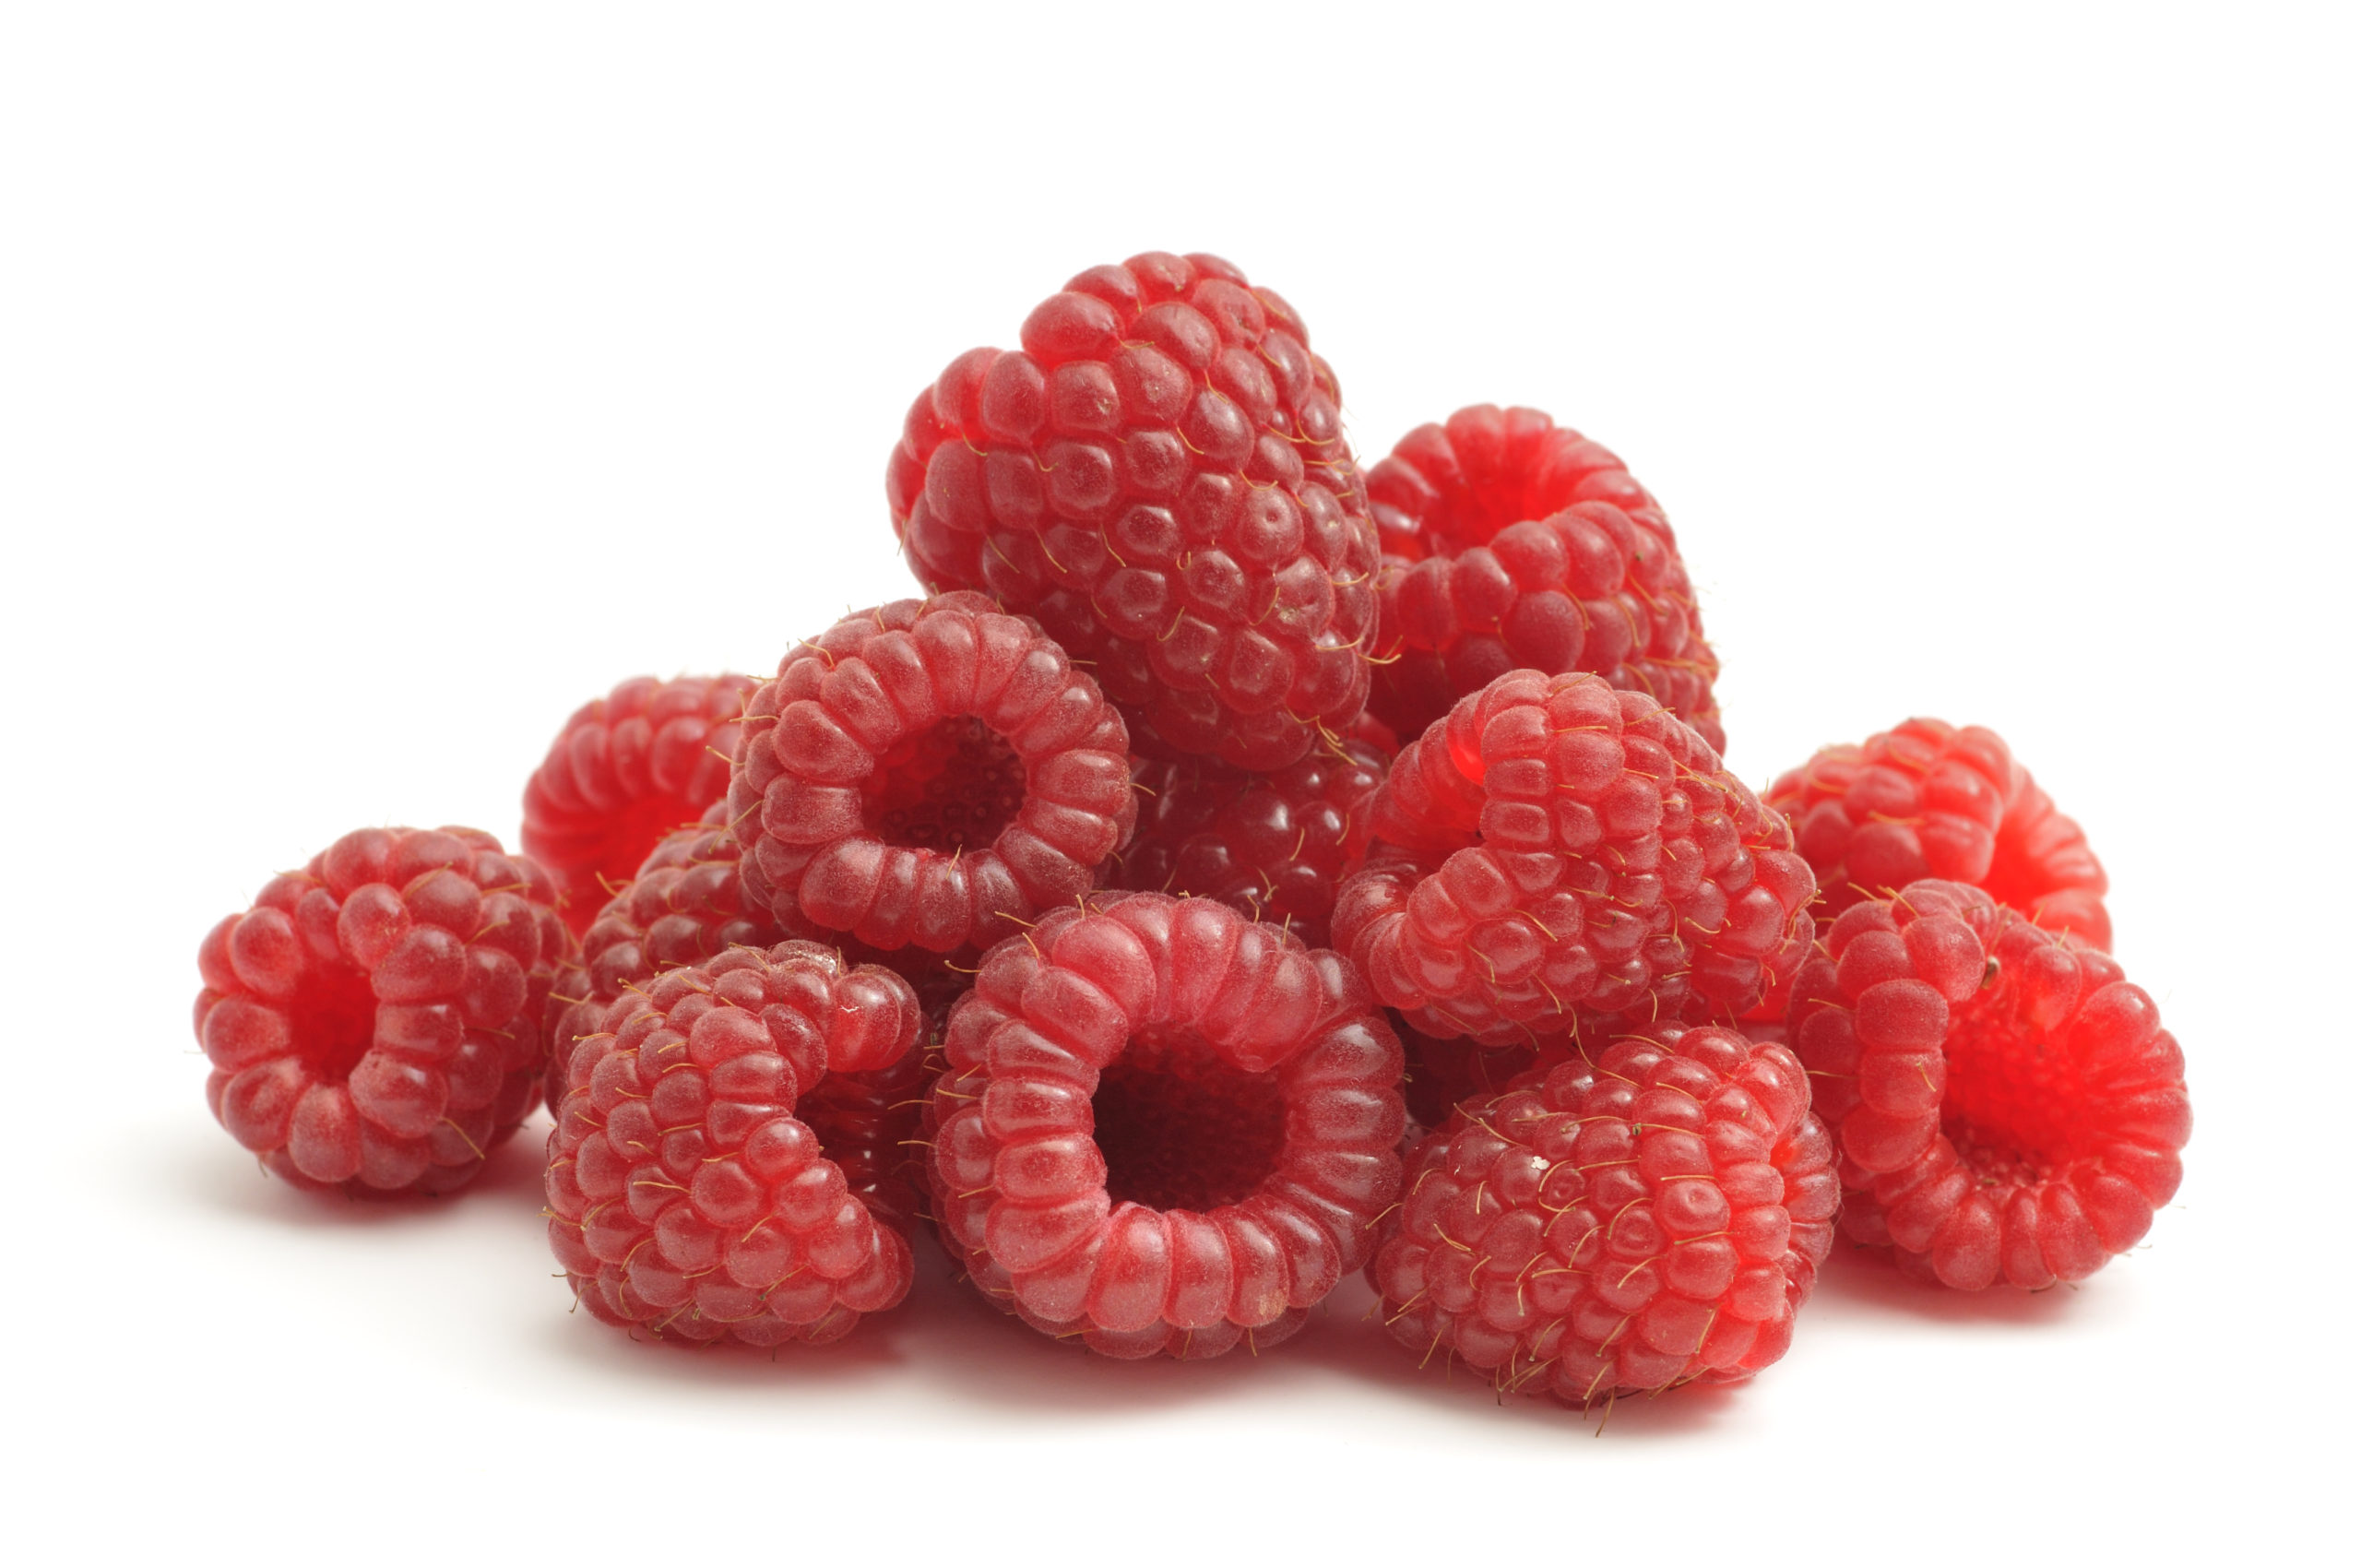 Isolated image of raspberries |  Fruits to lose weight